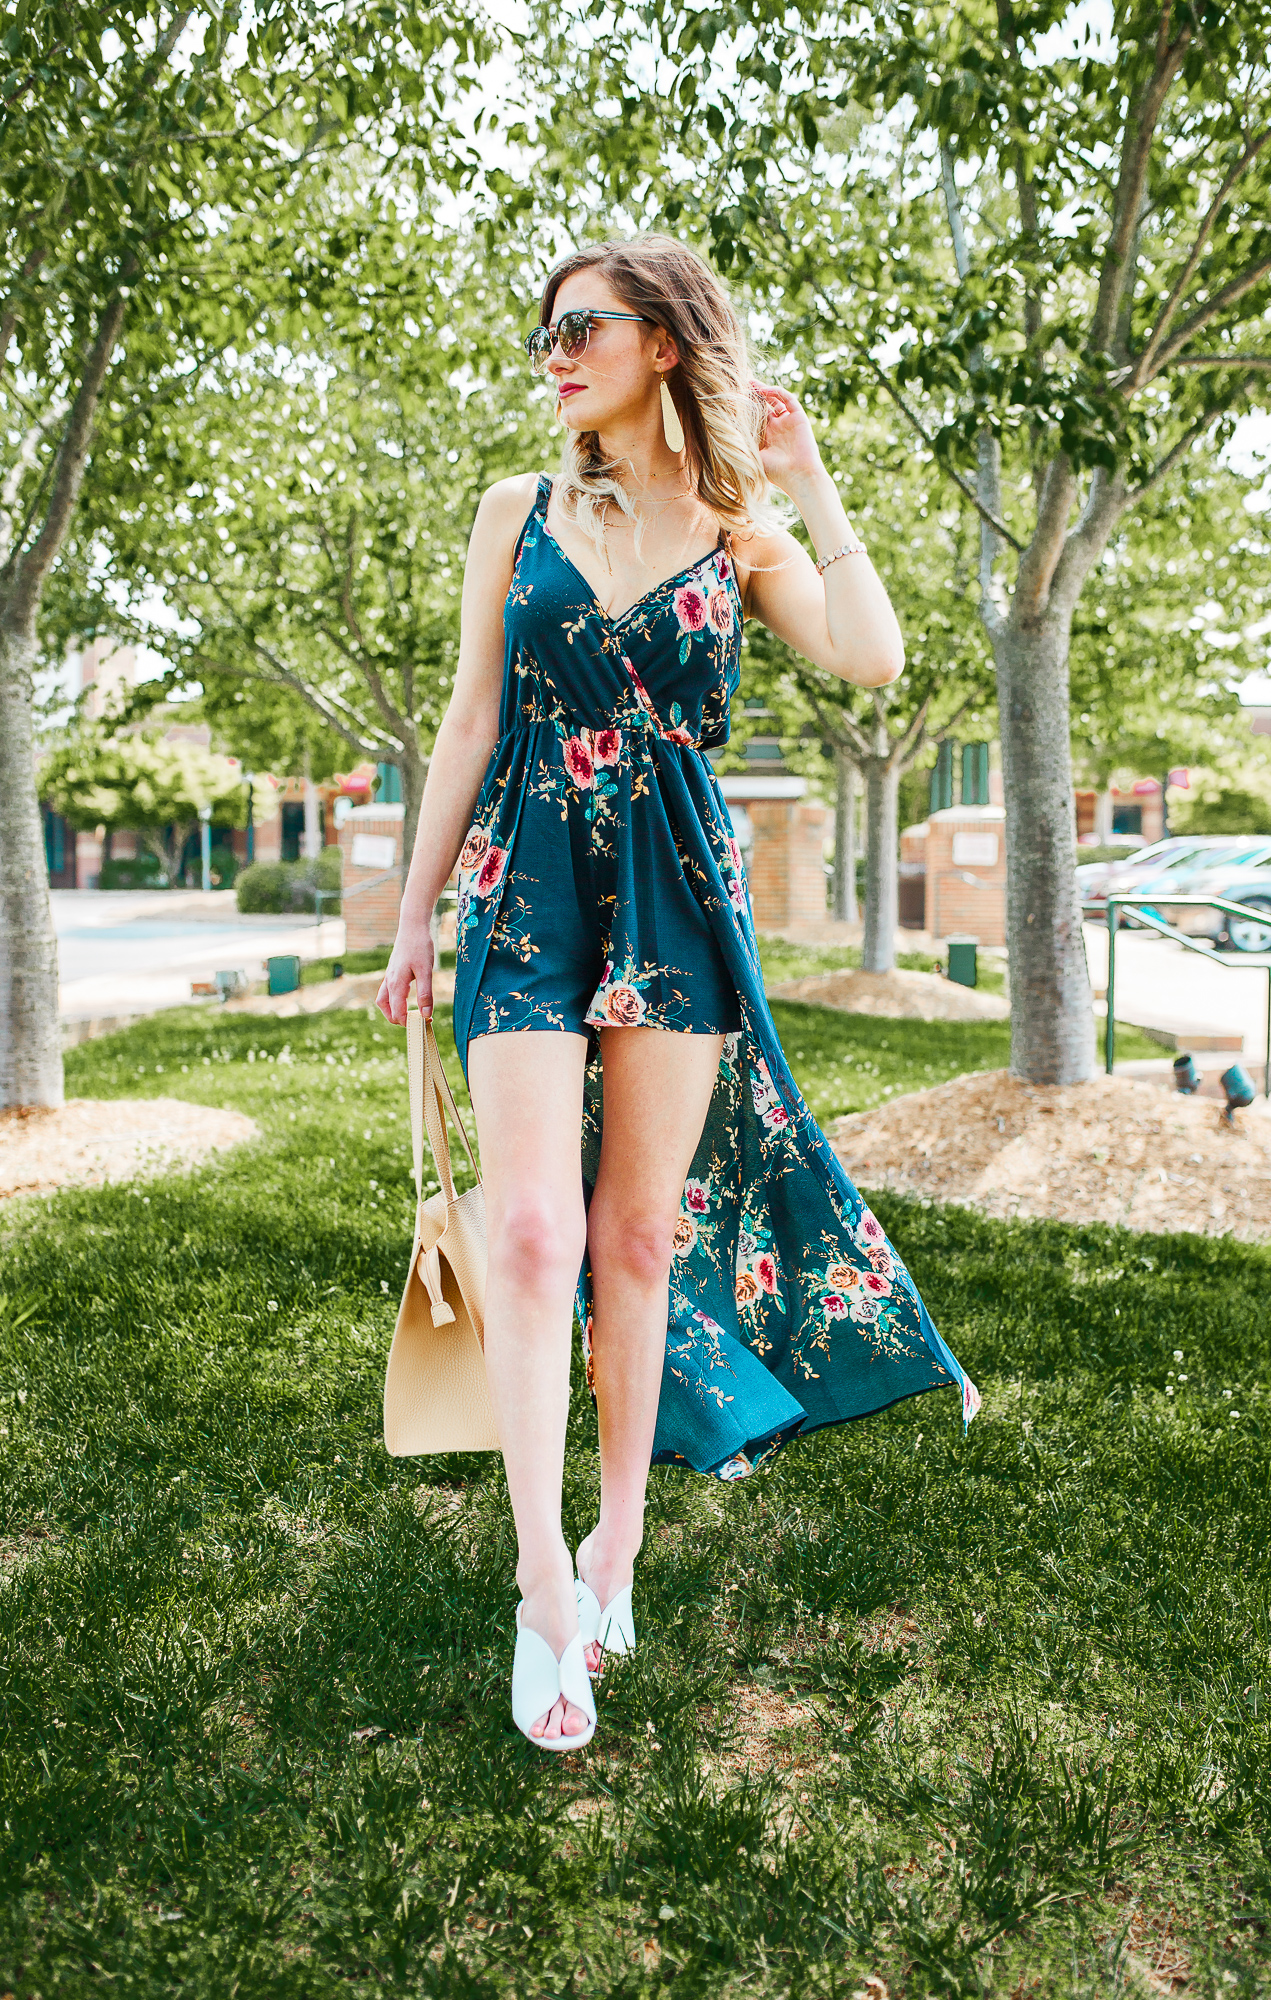  Romper Maxi Dress Combination is the perfect way to dress up during the summer! This summer / spring outfit captures the romper trend, as well as the chunky heel mule trend. North Carolina fashion and lifestyle blogger Jessica Linn is wearing a romper maxi dress from Copper Bloom, a nude purse by Universal Thread from Target, white chunky heel mules by Who What Wear from Target, gold leather statement earrings from RSA Studios, and a layered choker necklace from sugar fix Baublebar.